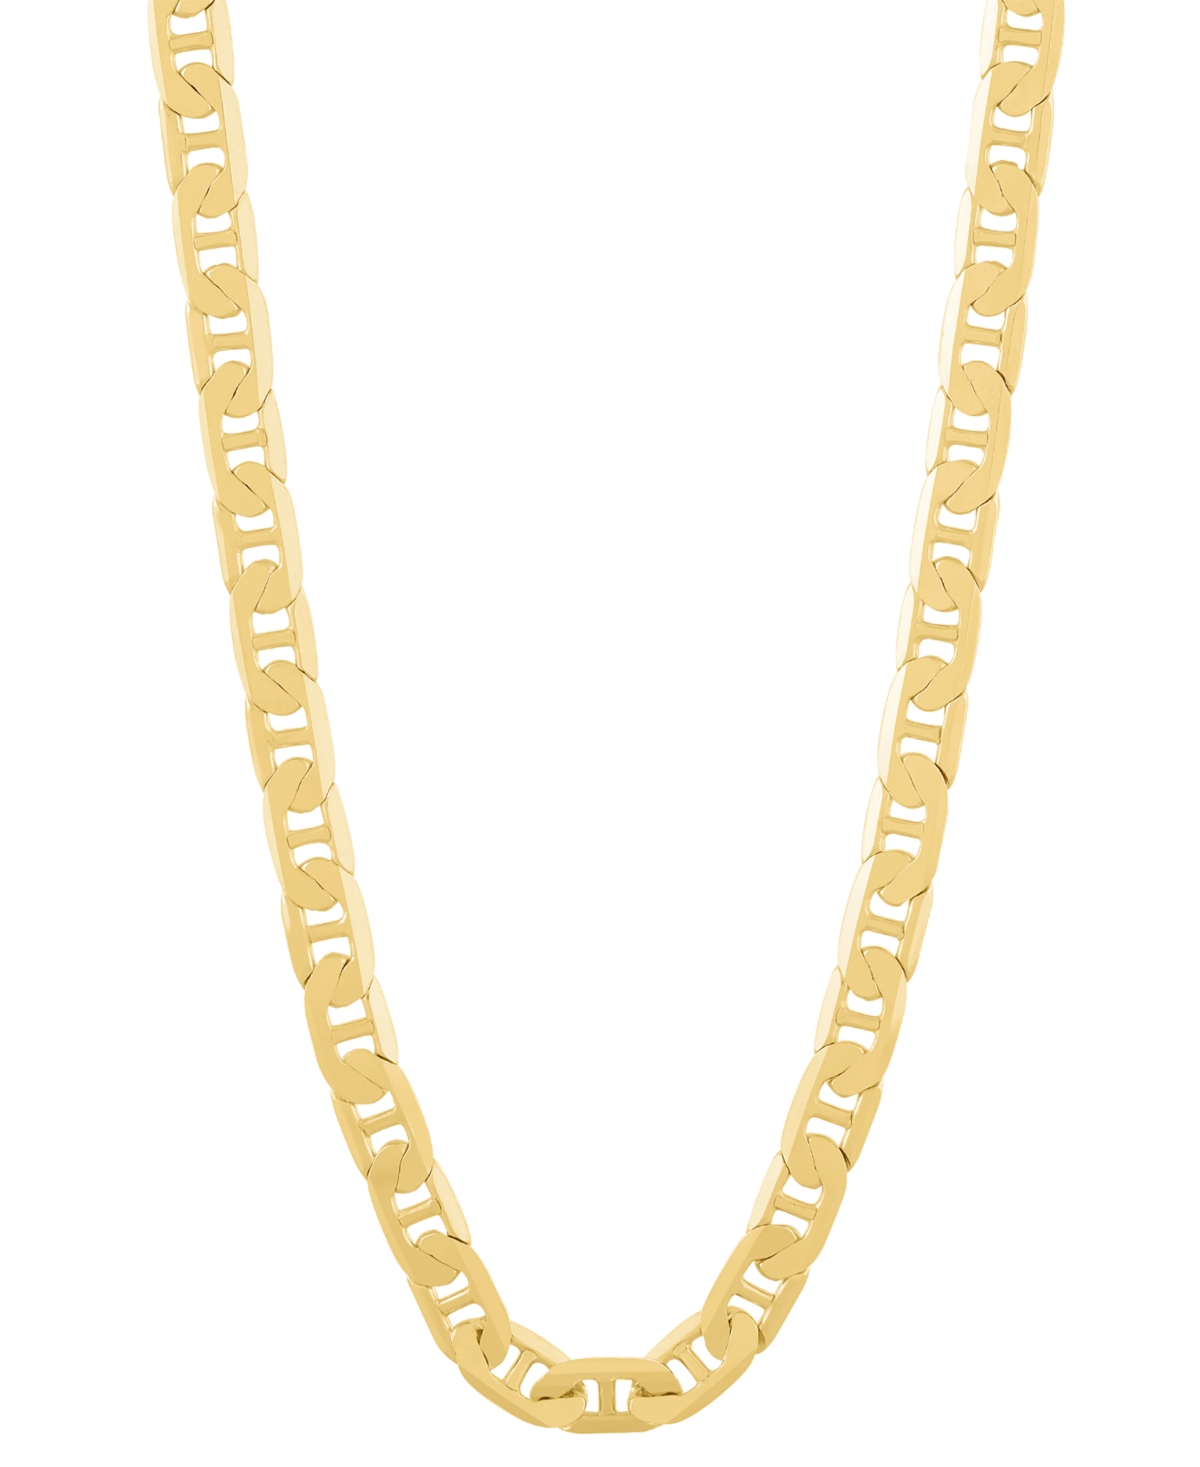 Italian Silver Polished Mariner Link 22" Chain Necklace In 18k Gold-plated Sterling Silver & Sterling Silver In Gold Over Silver